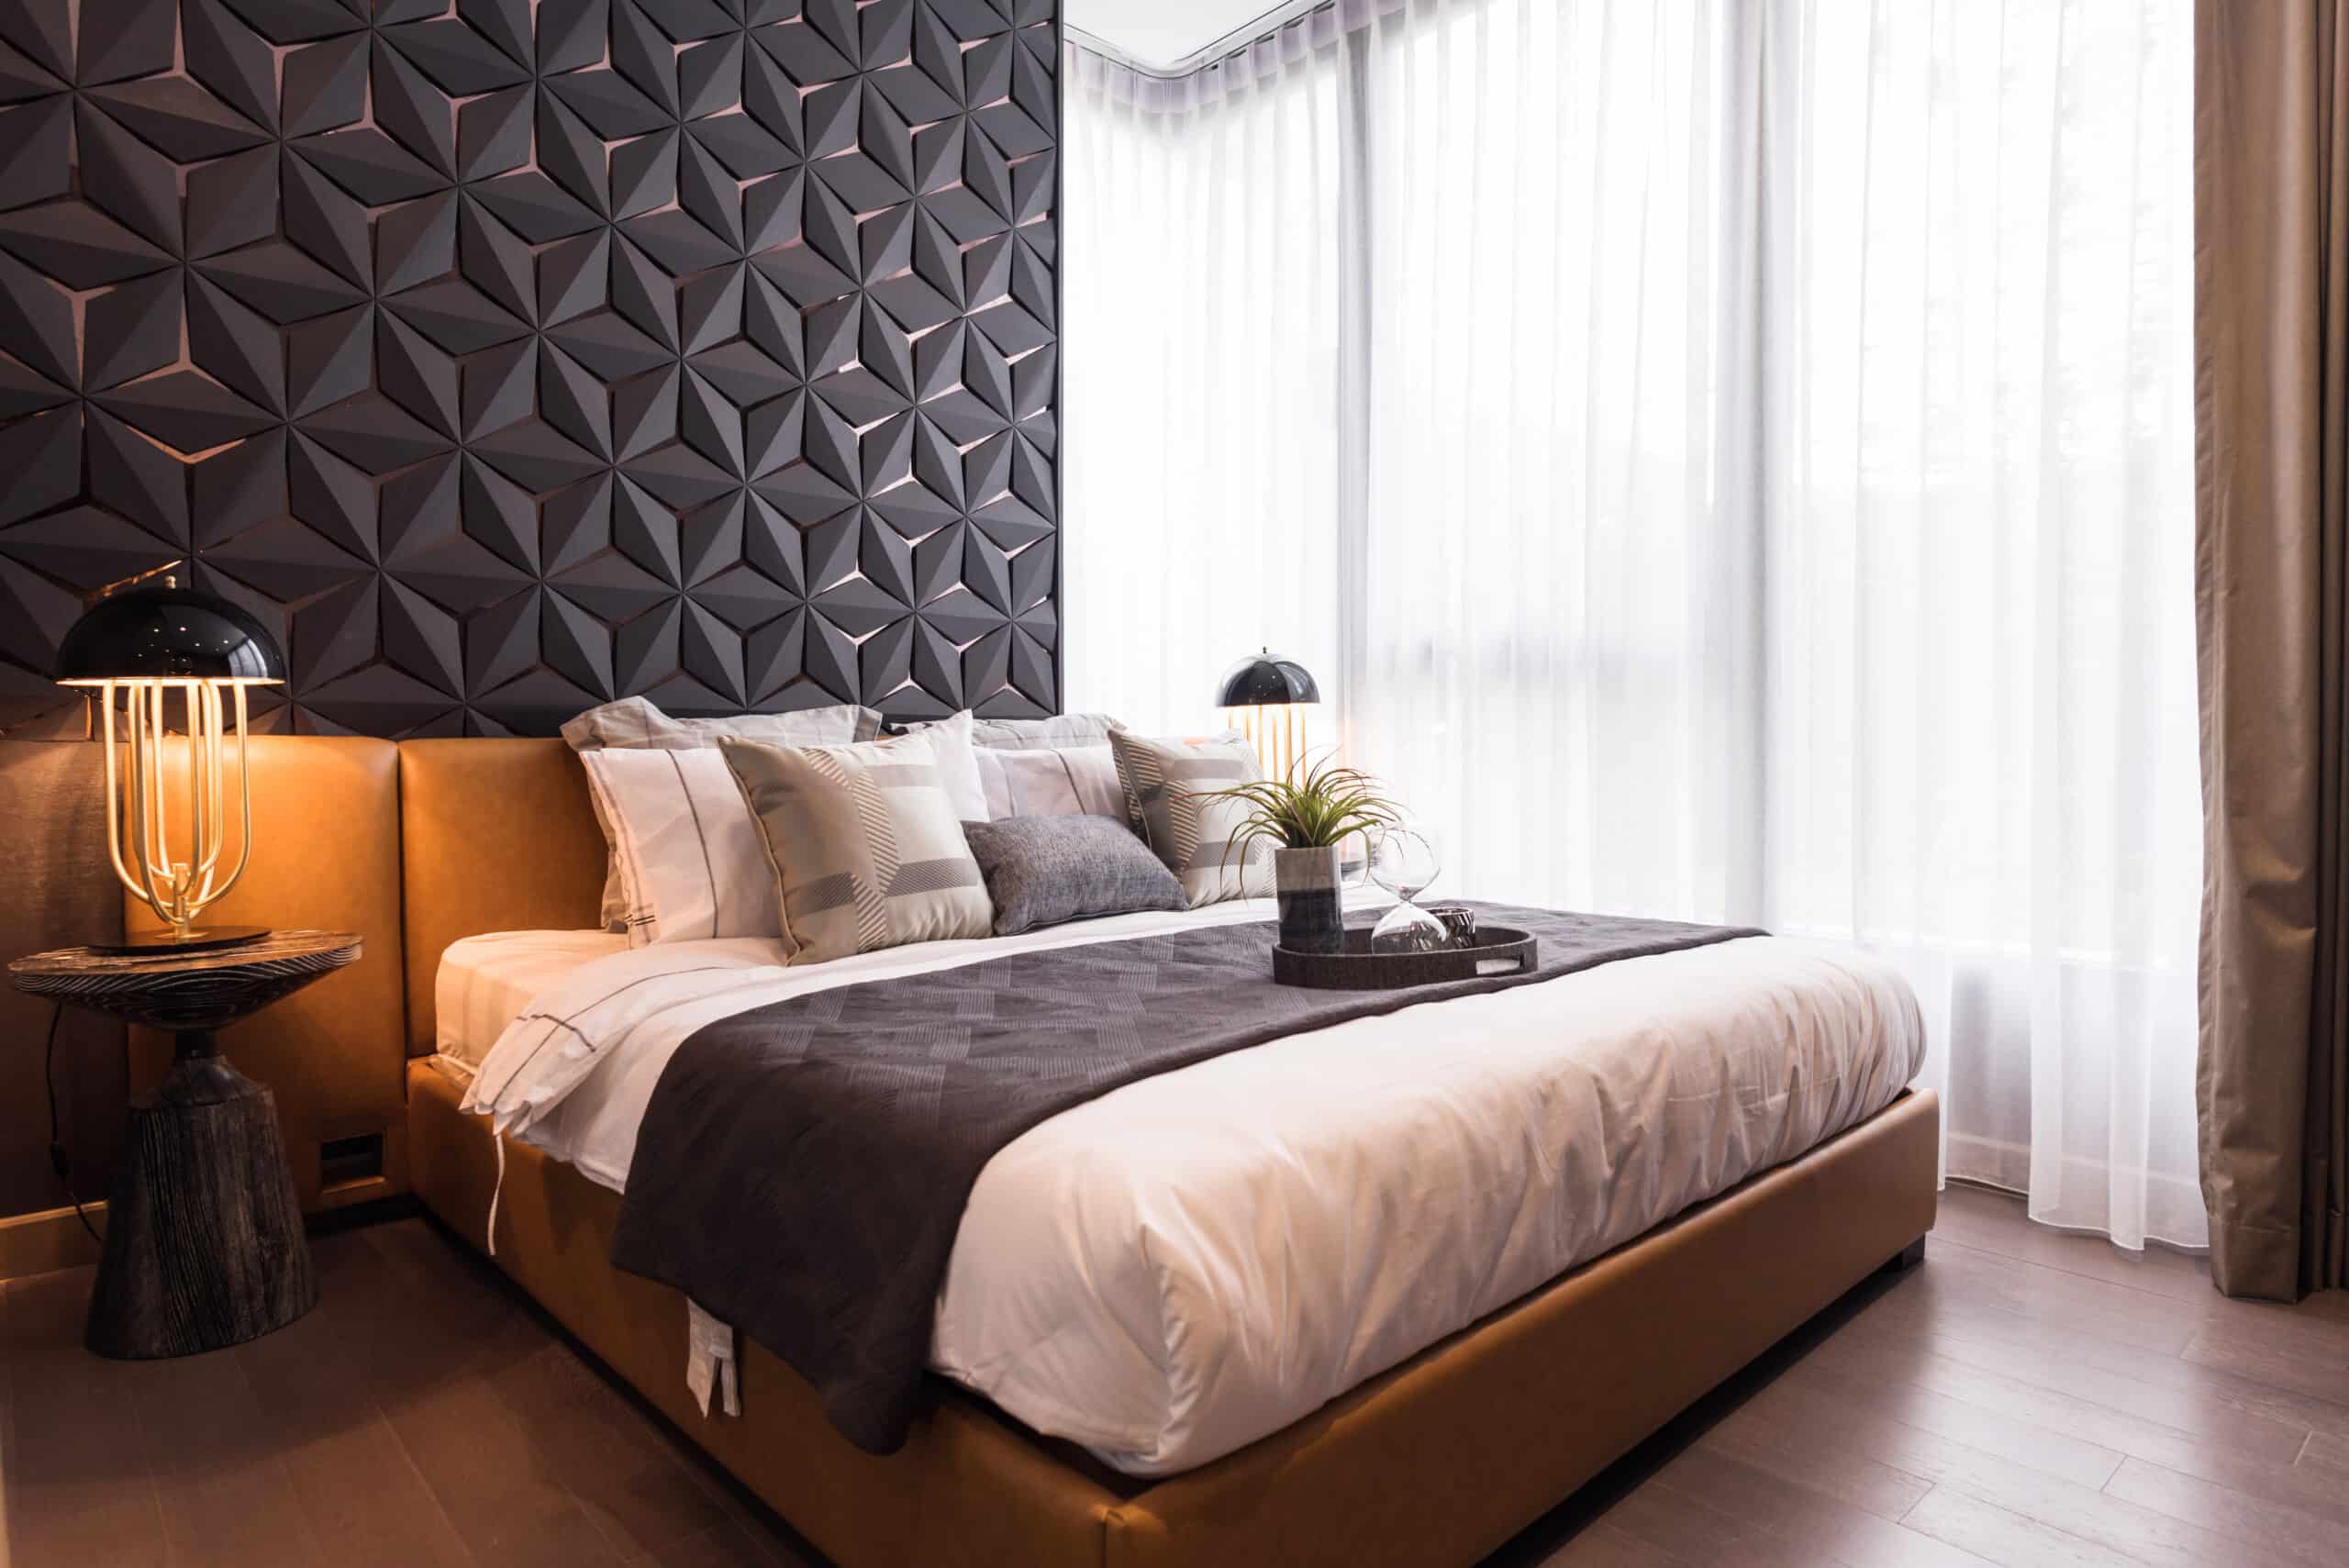 8 Interesting Bedroom Ideas You Probably Haven’t Thought About